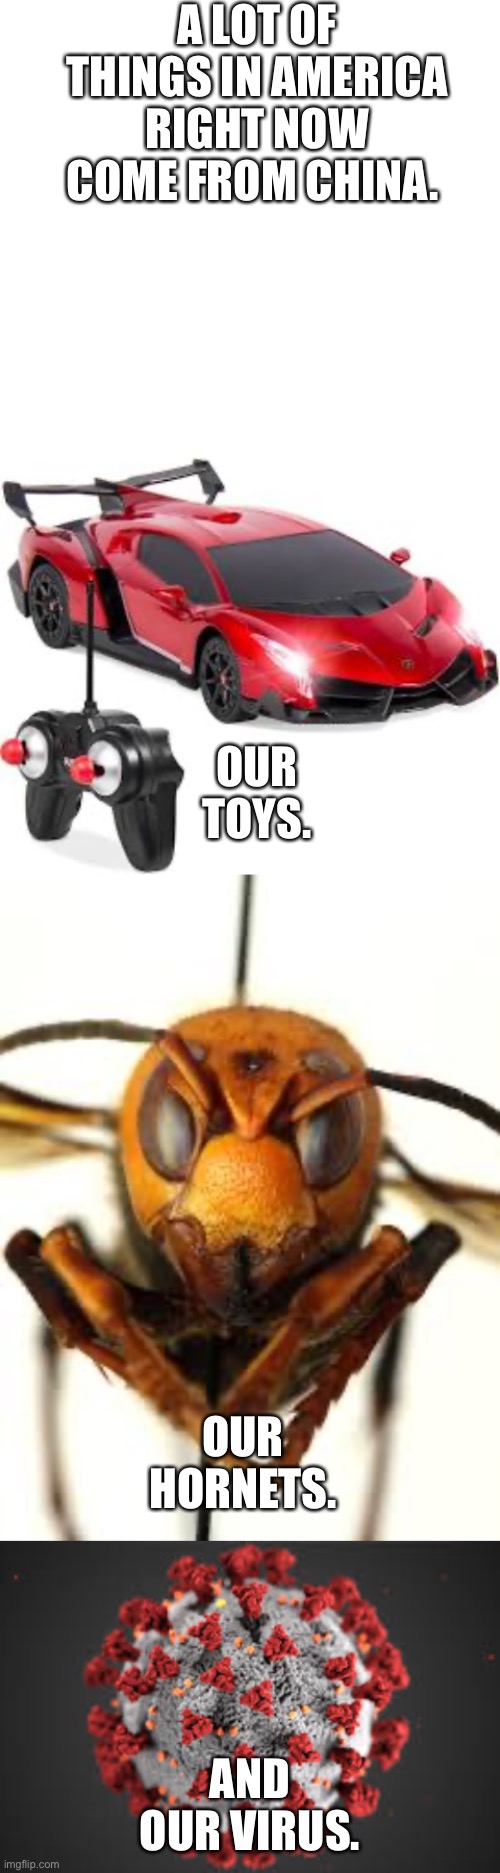 A LOT OF THINGS IN AMERICA RIGHT NOW COME FROM CHINA. OUR TOYS. OUR HORNETS. AND OUR VIRUS. | image tagged in politics,china,murder hornet,coronavirus,covid19 | made w/ Imgflip meme maker